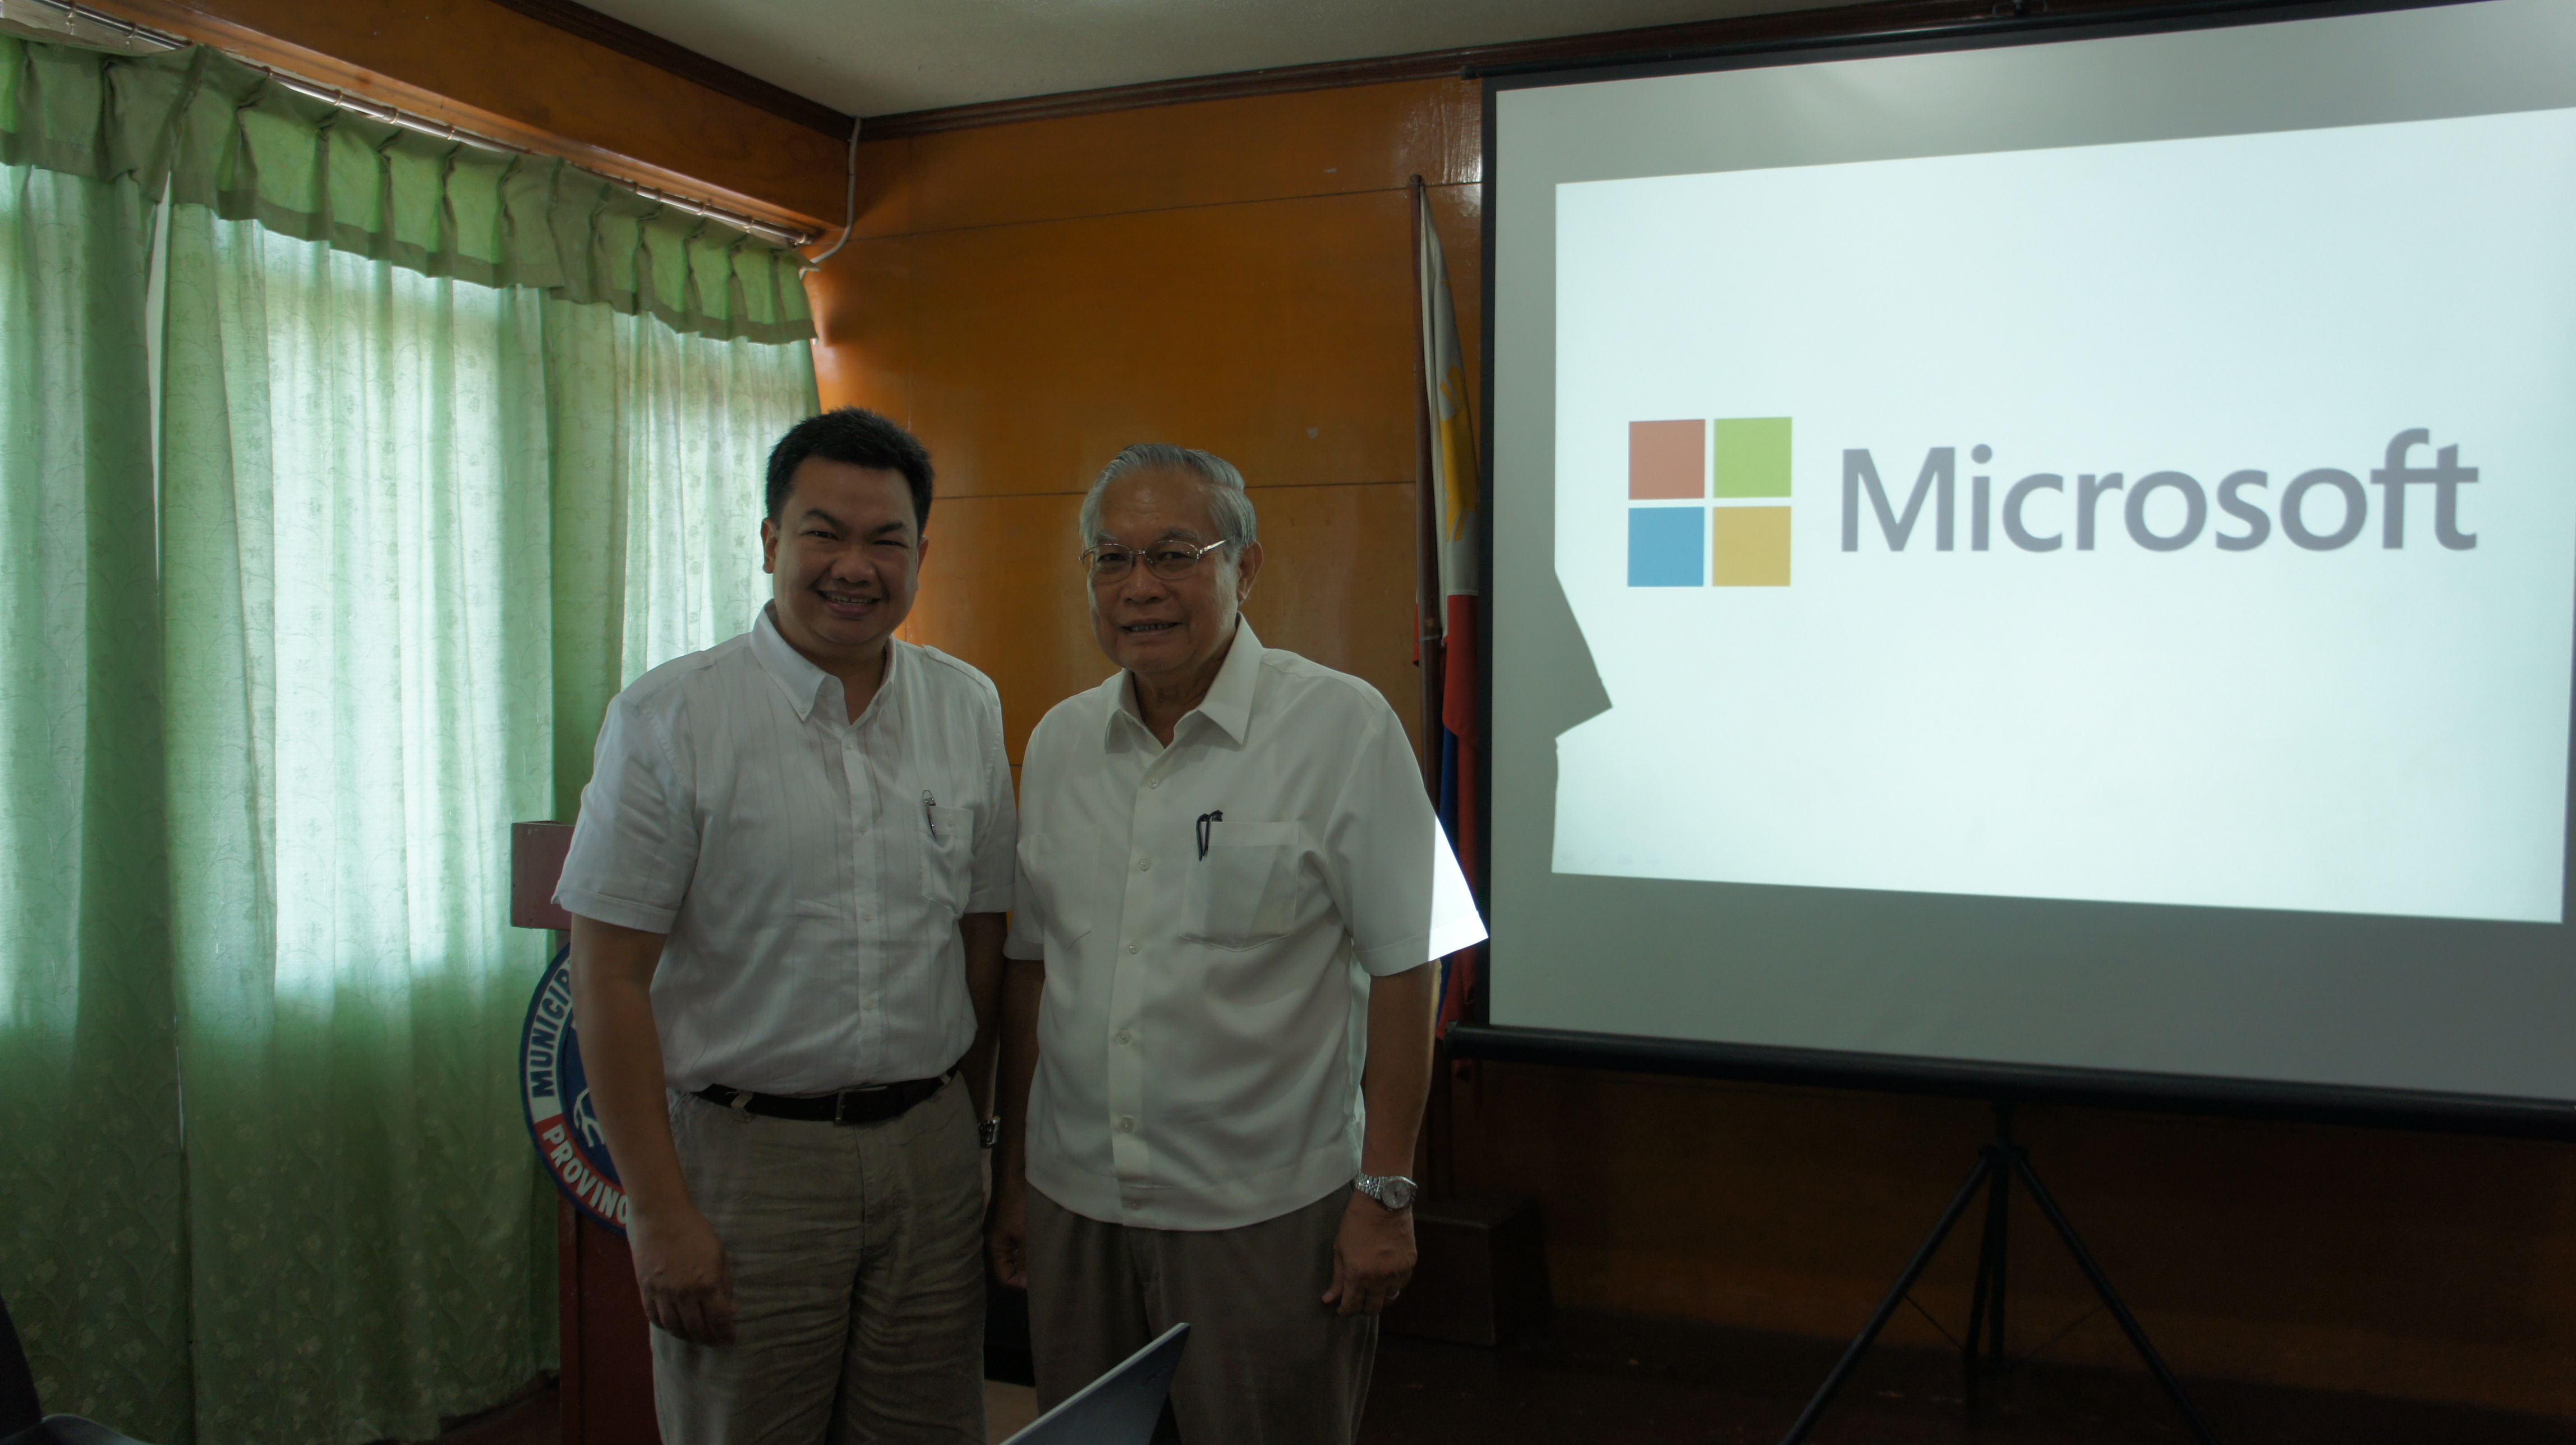 Raul Cortez (left), Legal and Corporate Affairs Director of Microsoft Philippines, with Arcadio Gorriceta, Municipal Mayor of Pavia, at the NGO Tour seminar